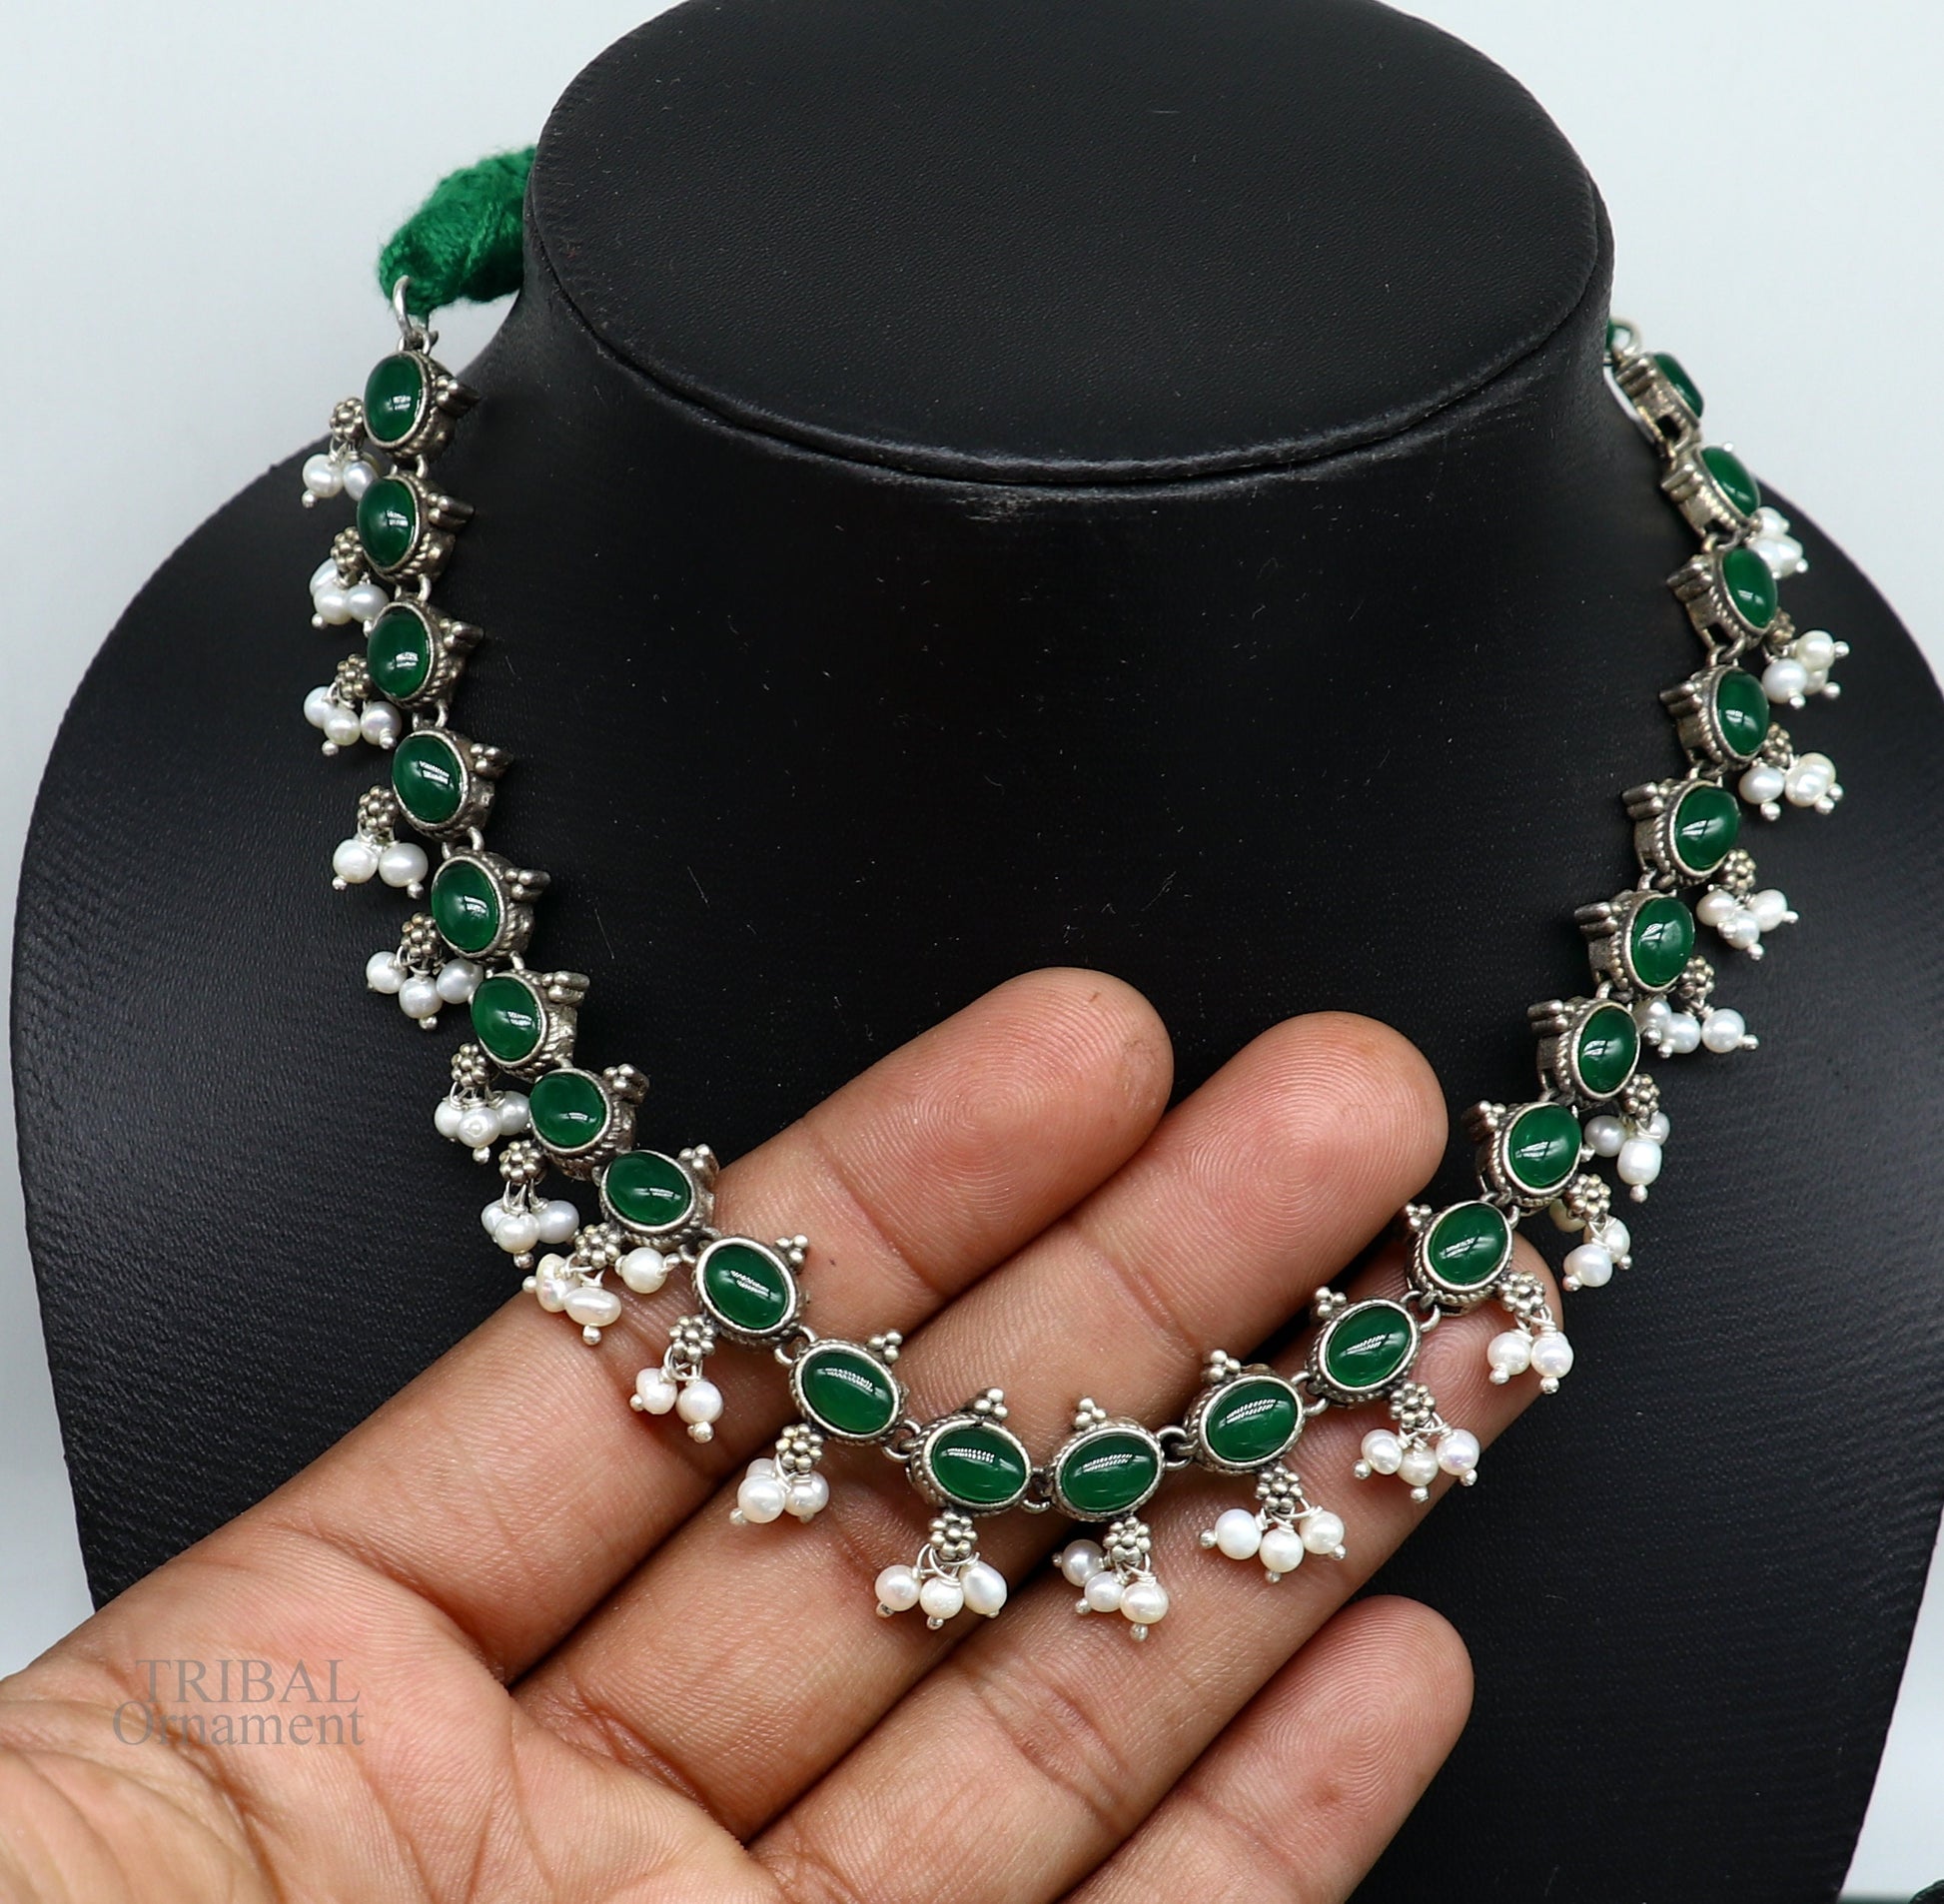 925 sterling silver handmade gorgeous green stone stylish pearl design necklace, wedding brides charm customized wedding jewelry set282 - TRIBAL ORNAMENTS